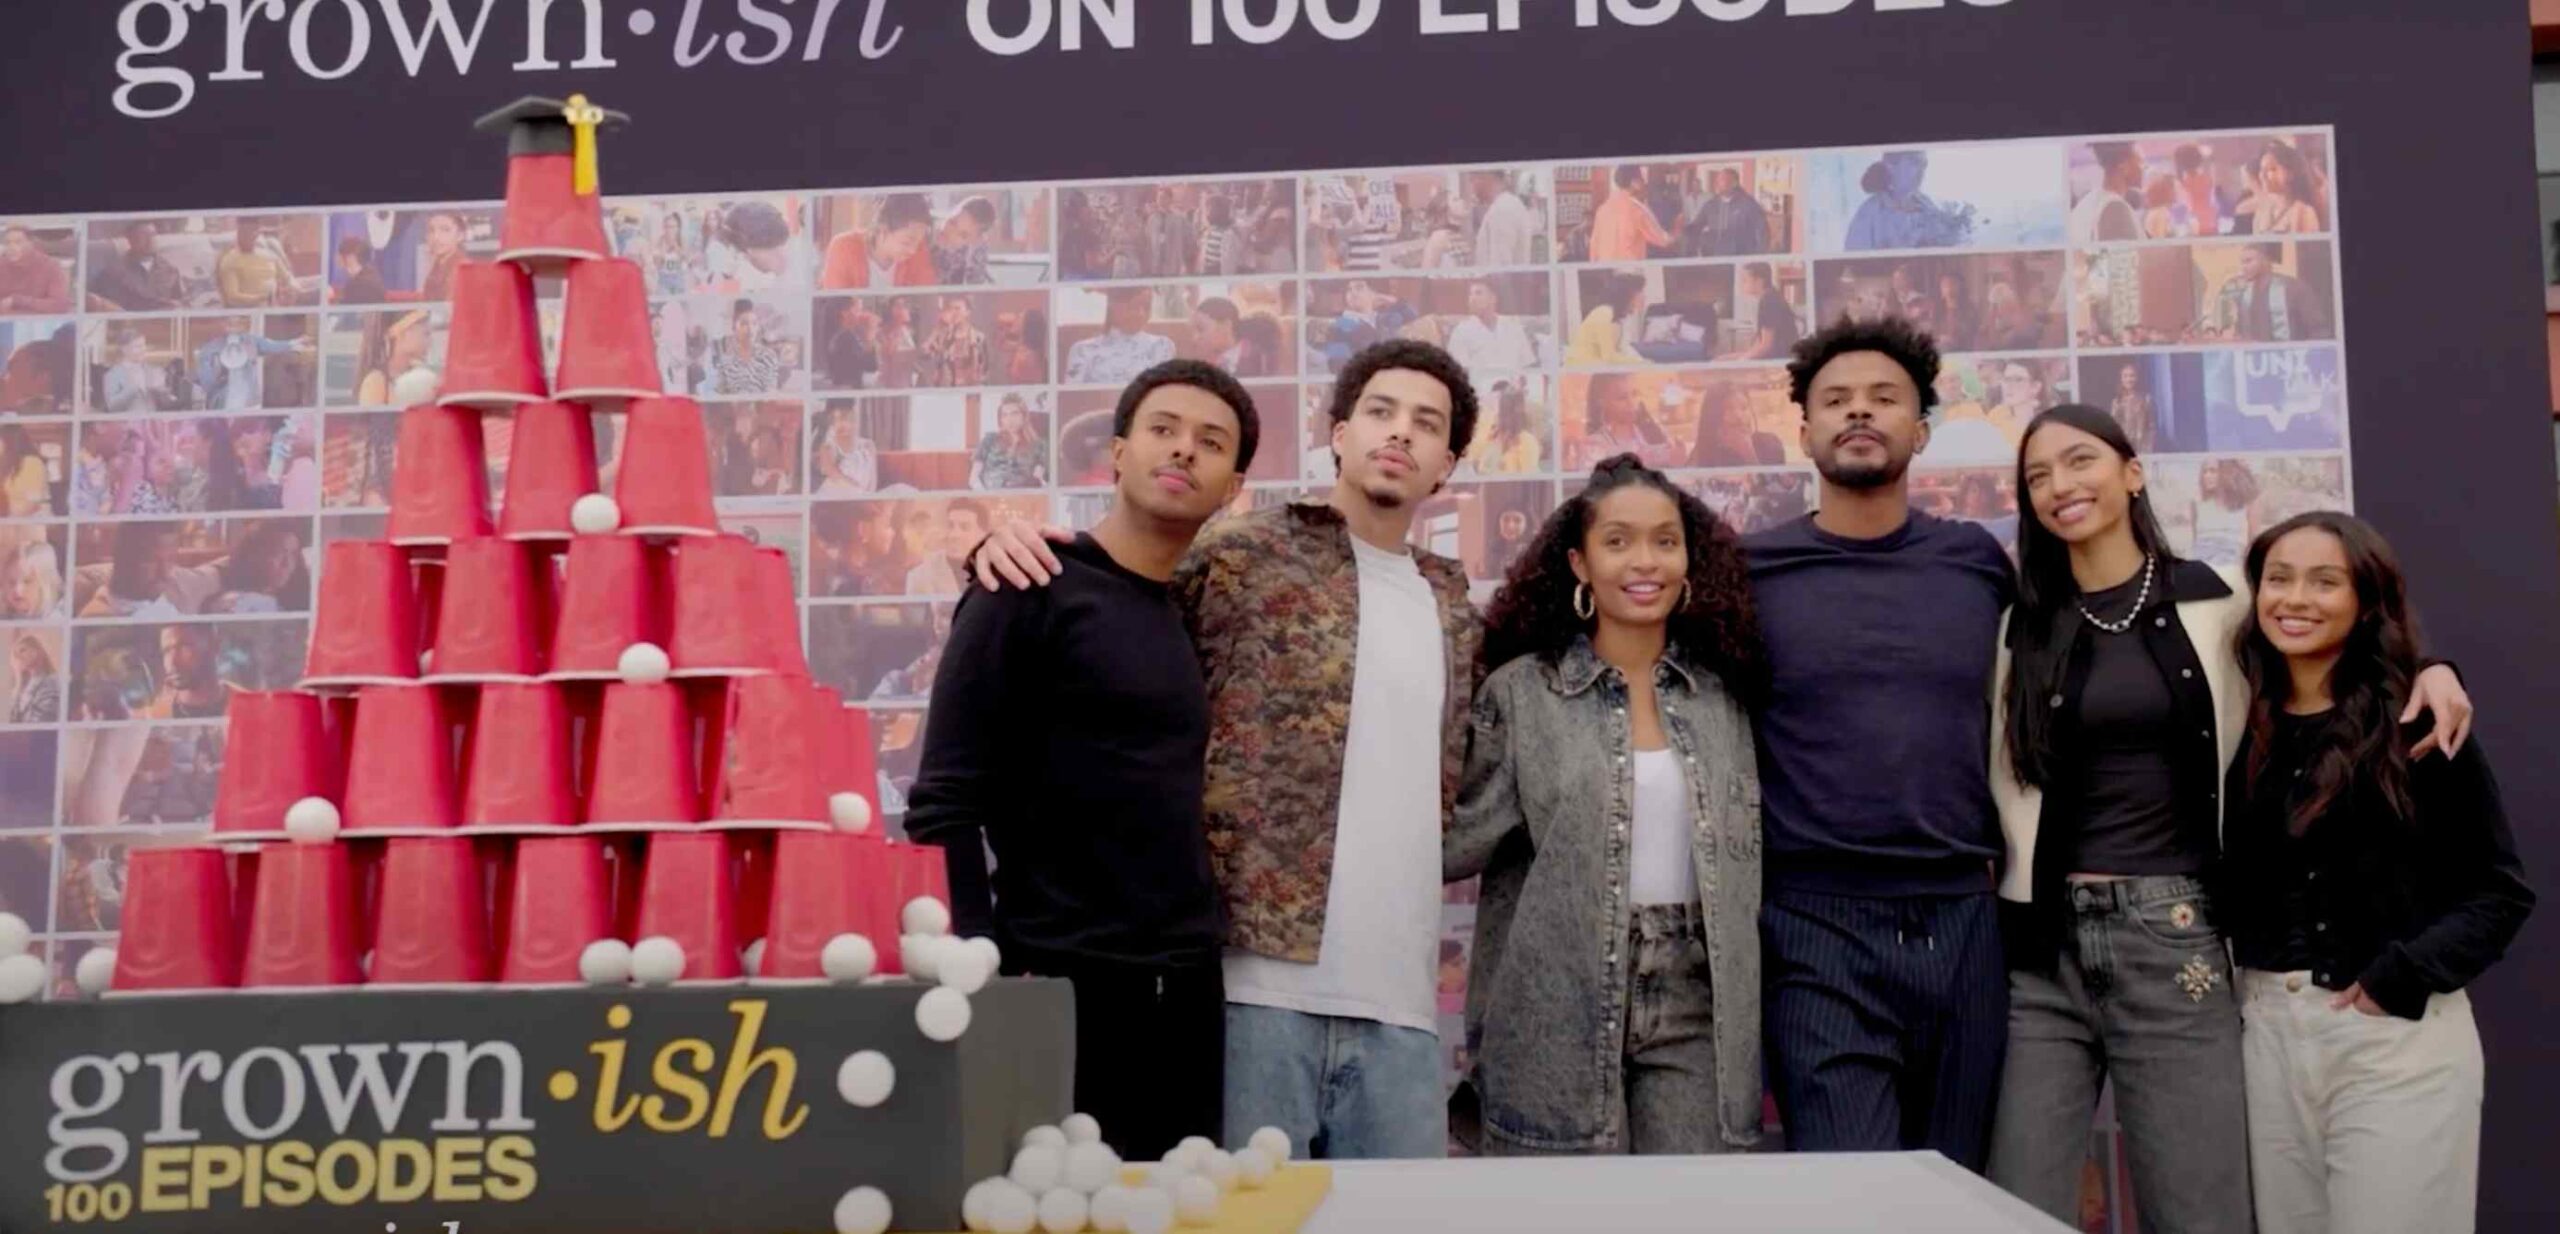 The 'Grown-ish' Cast Celebrates The 'Surreal' Achievement Of 100 Episodes